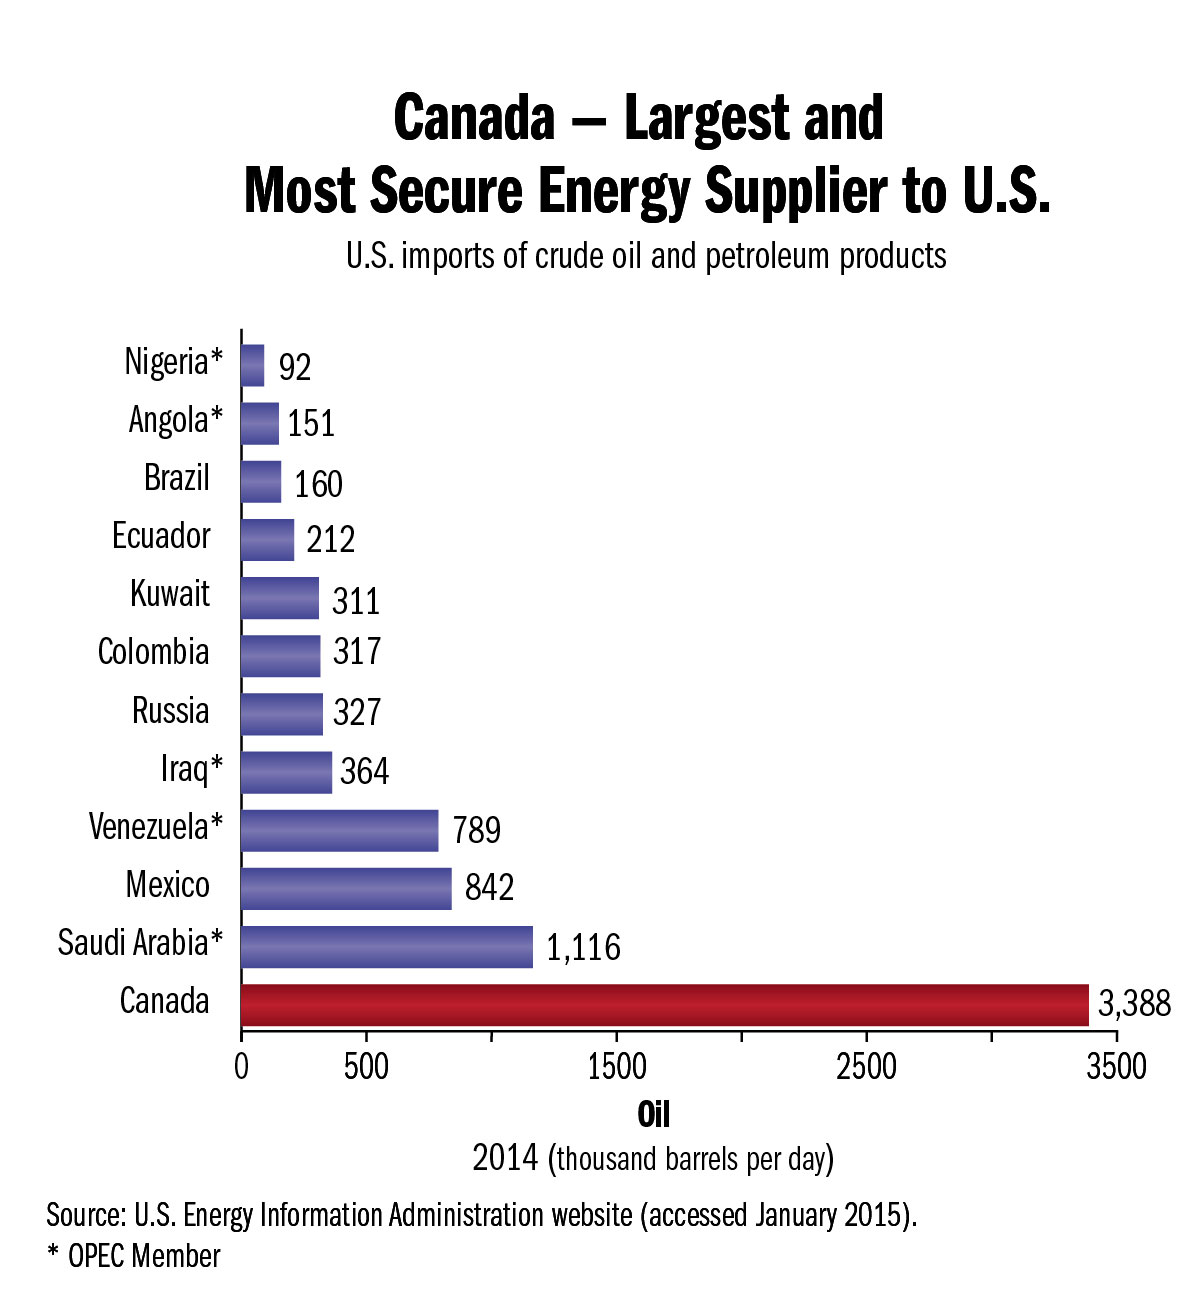 U.S. imports of crude oil by country